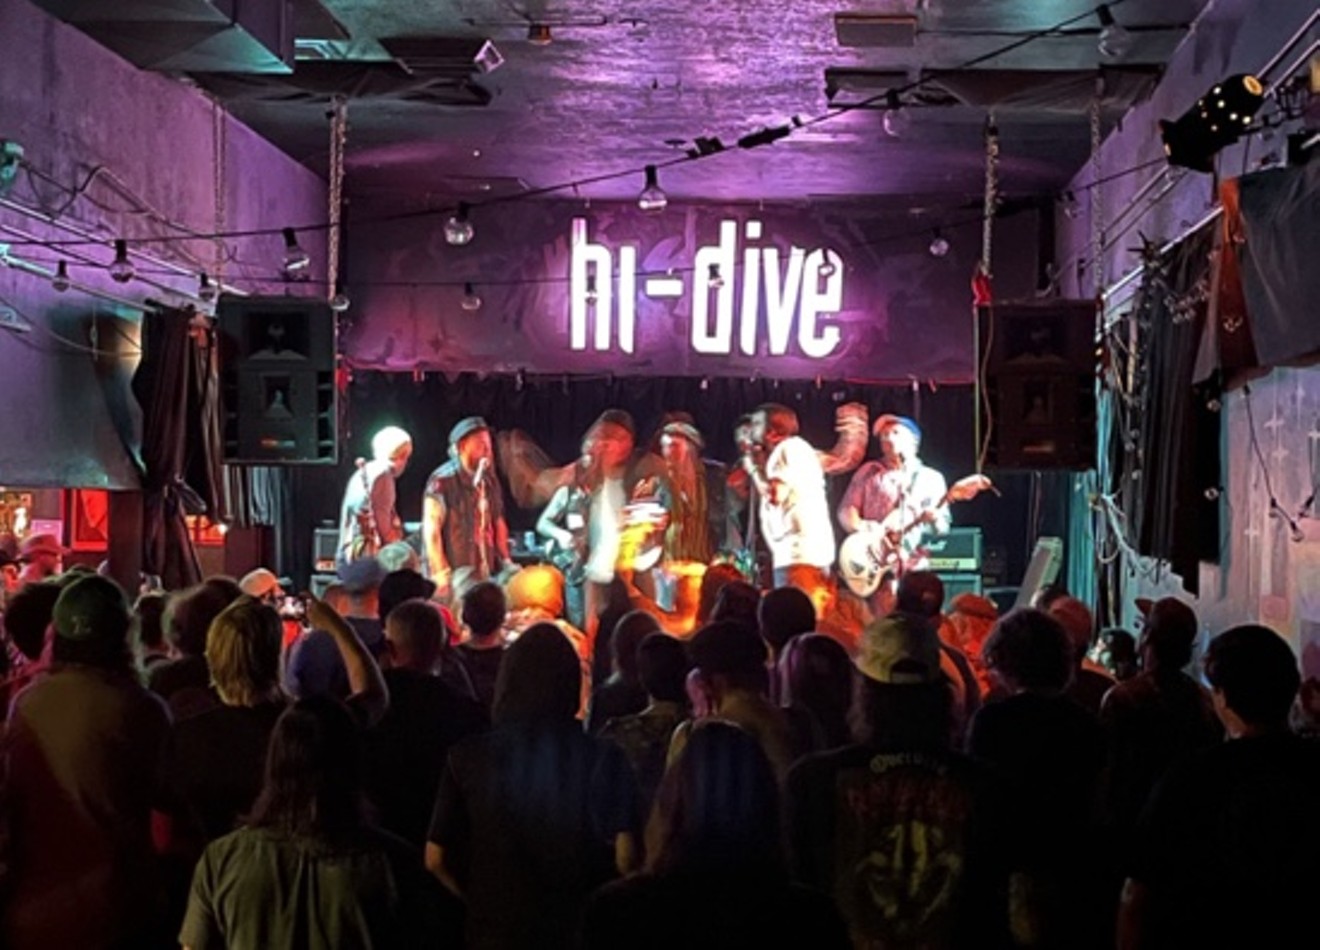 The hi-dive is a known first stepping stone for emerging local bands.